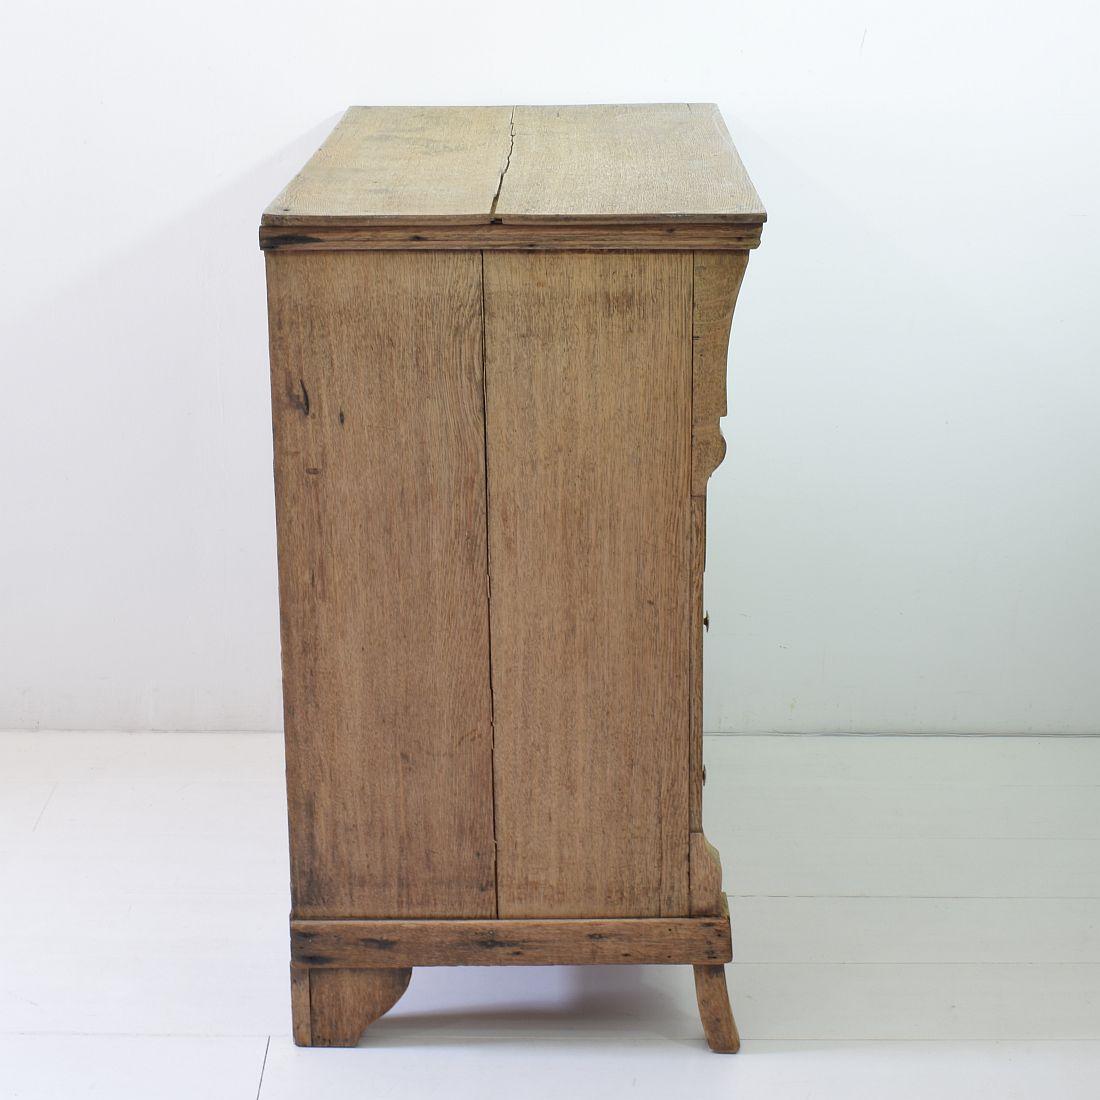 Wood Early 19th Century Dutch Oak Empire Chest of Drawers